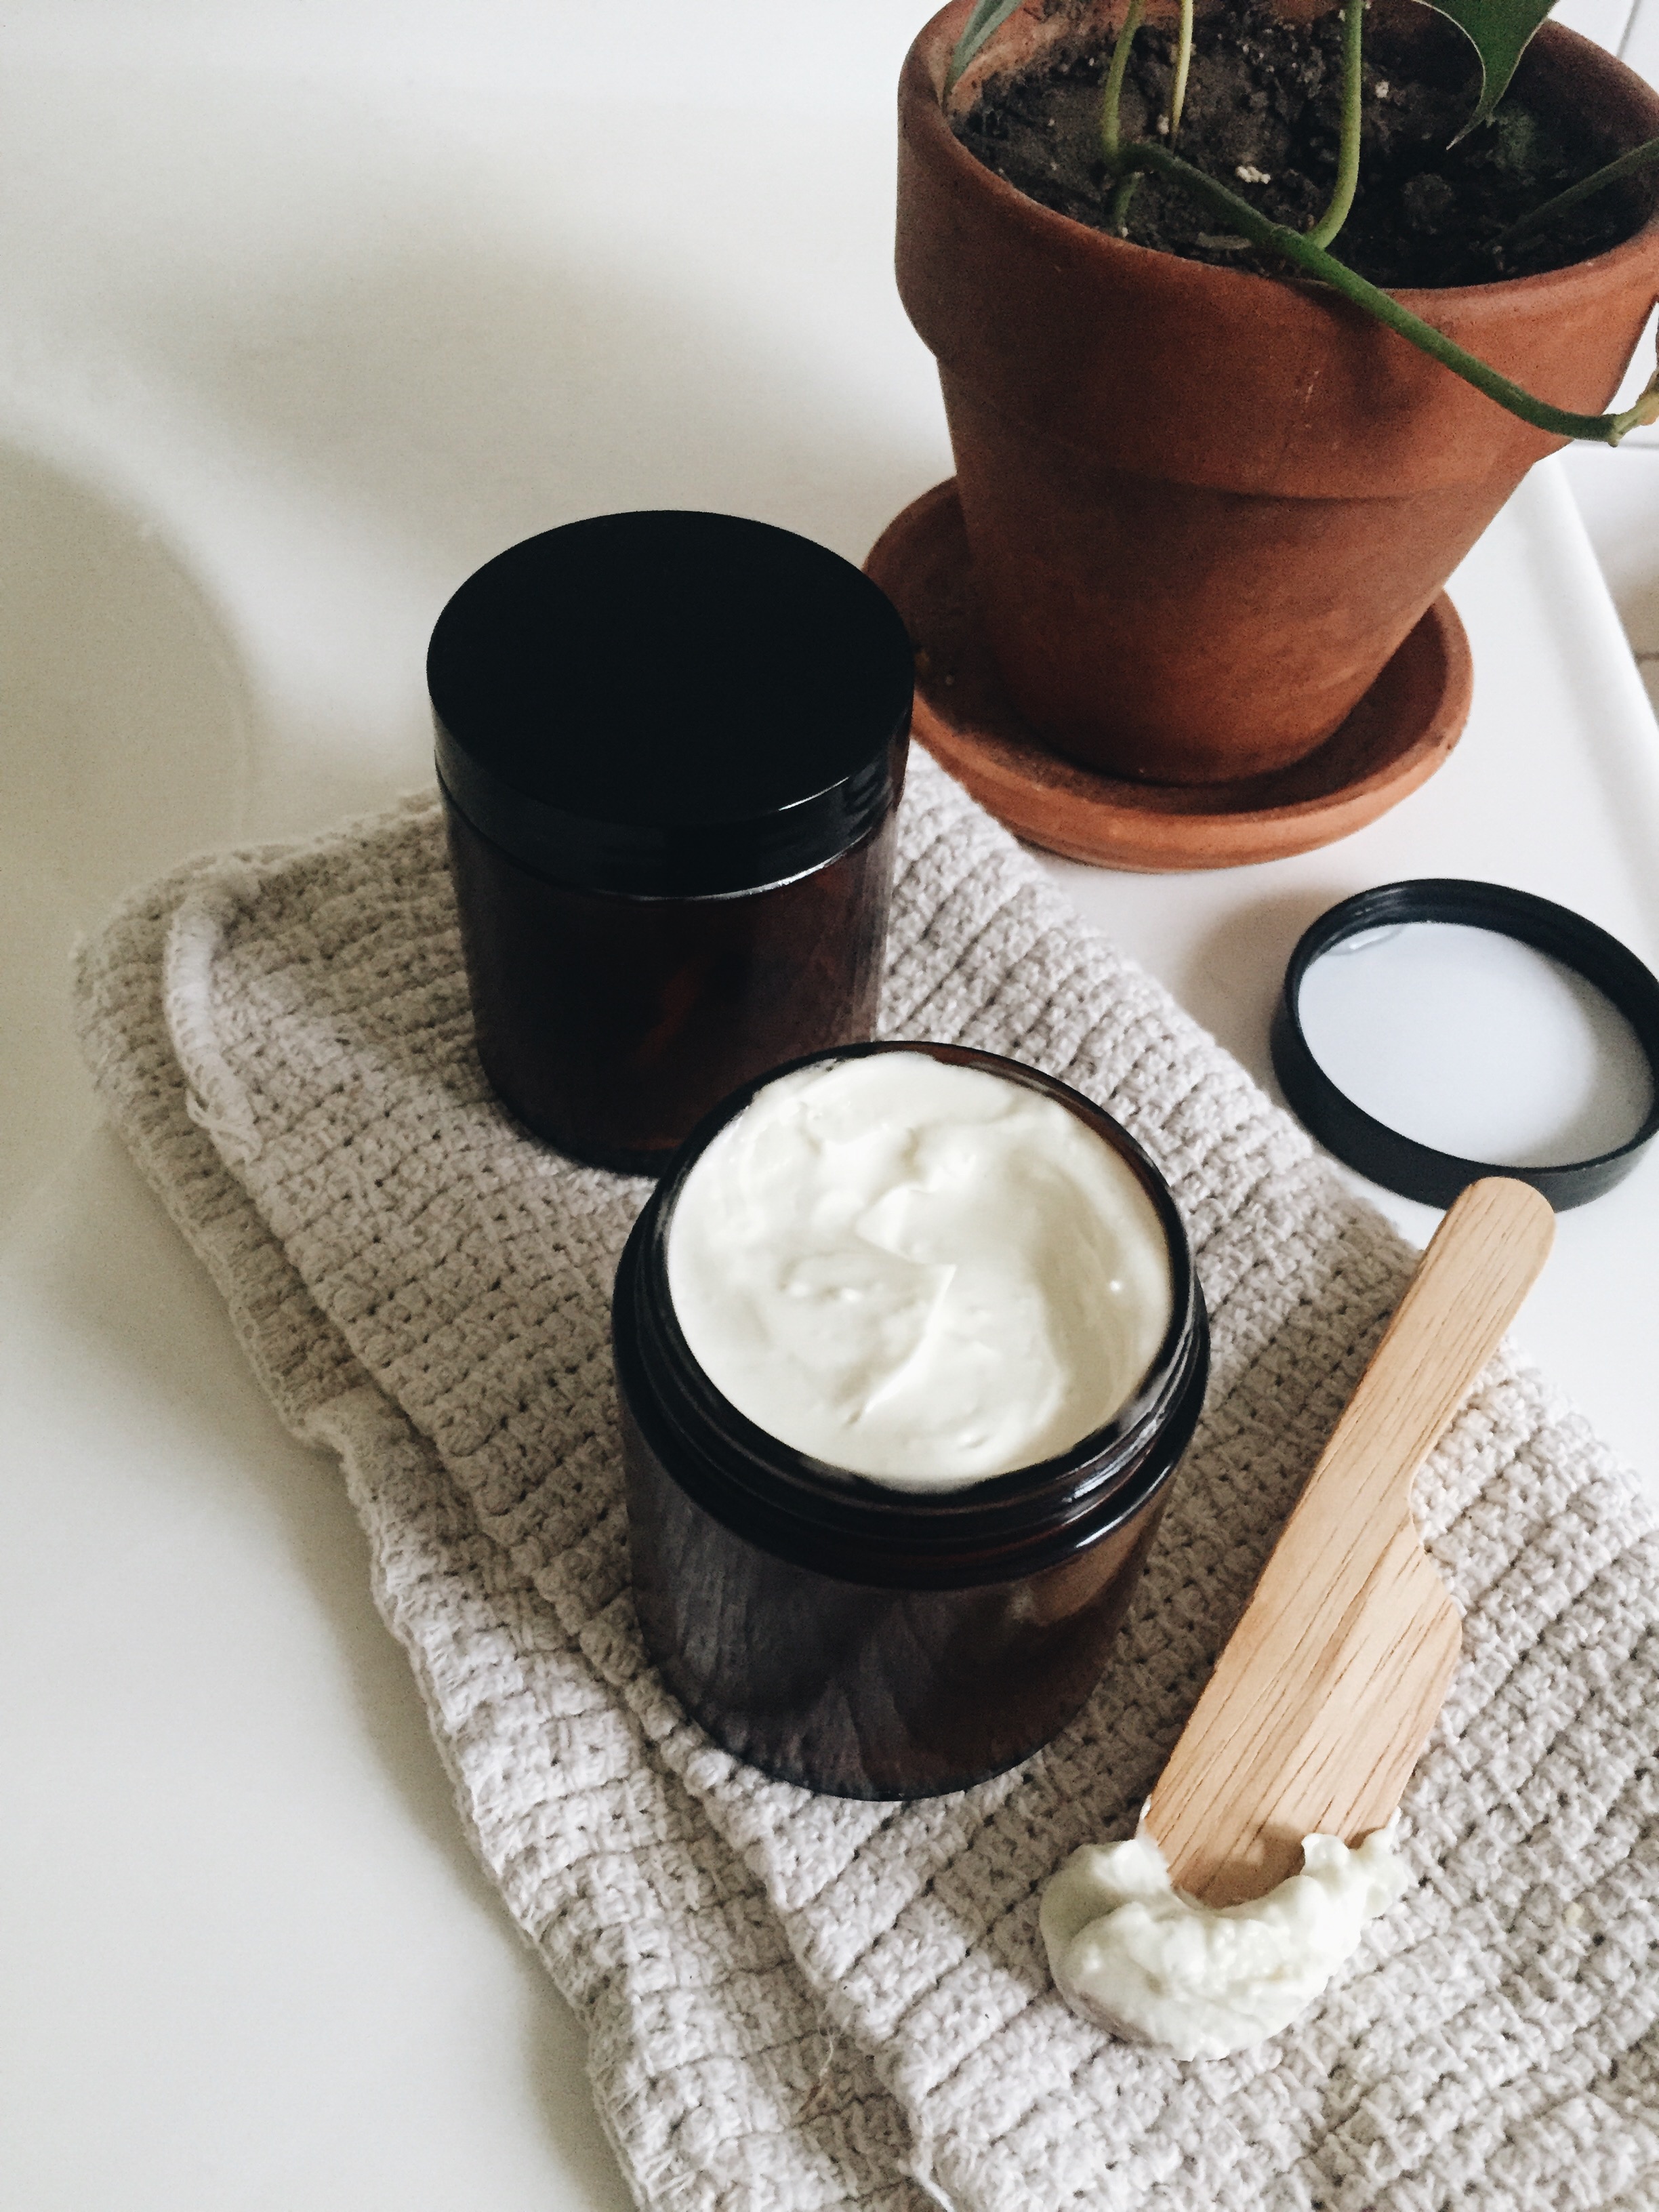 3 DIY Beauty recipes that use beeswax to heal dry skin – SheKnows